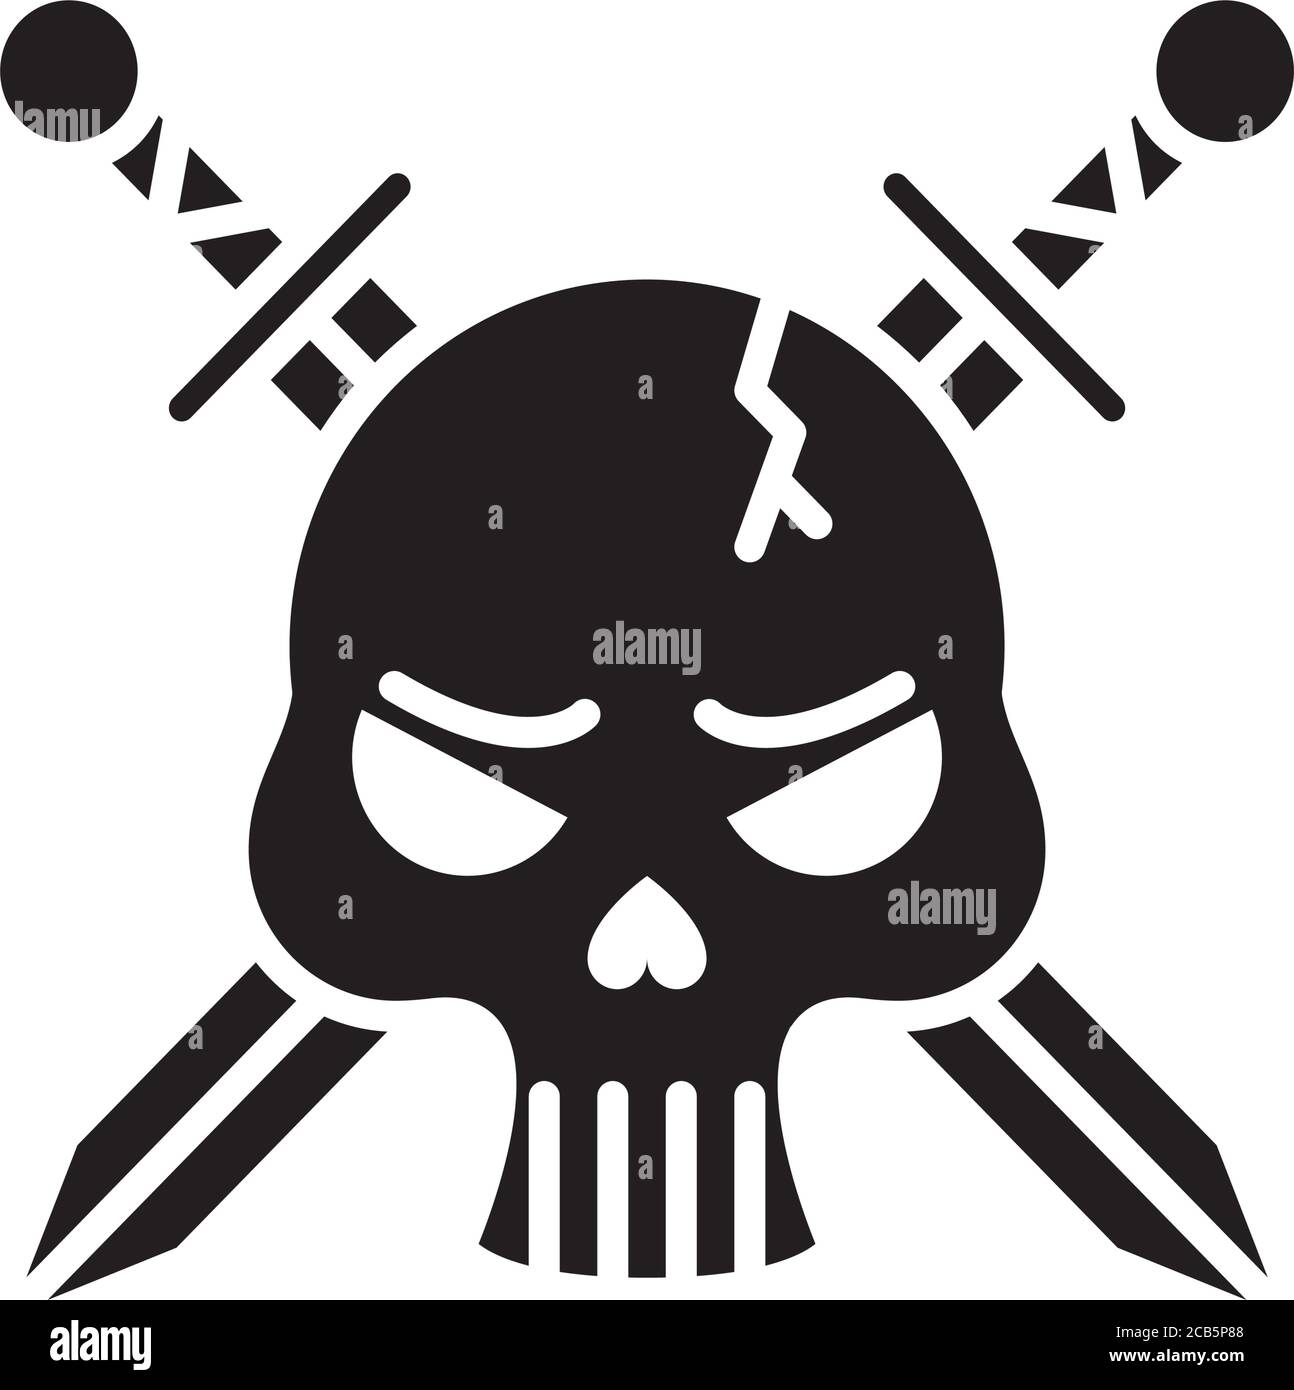 death skull head with swords crossed silhouette style vector illustration design Stock Vector